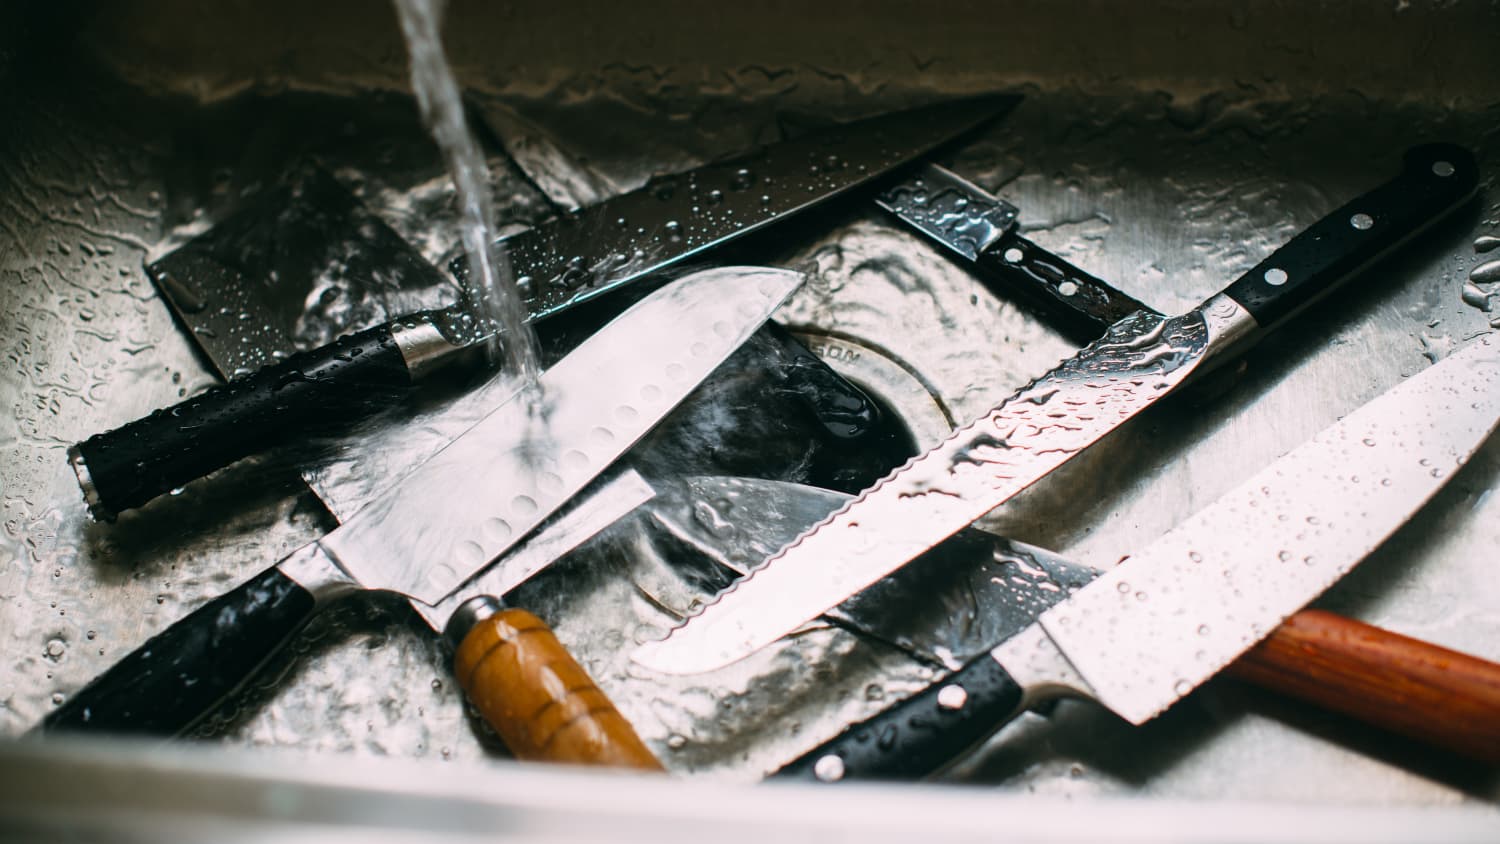 9 Simple Tips for Keeping Kitchen Knives Sharp